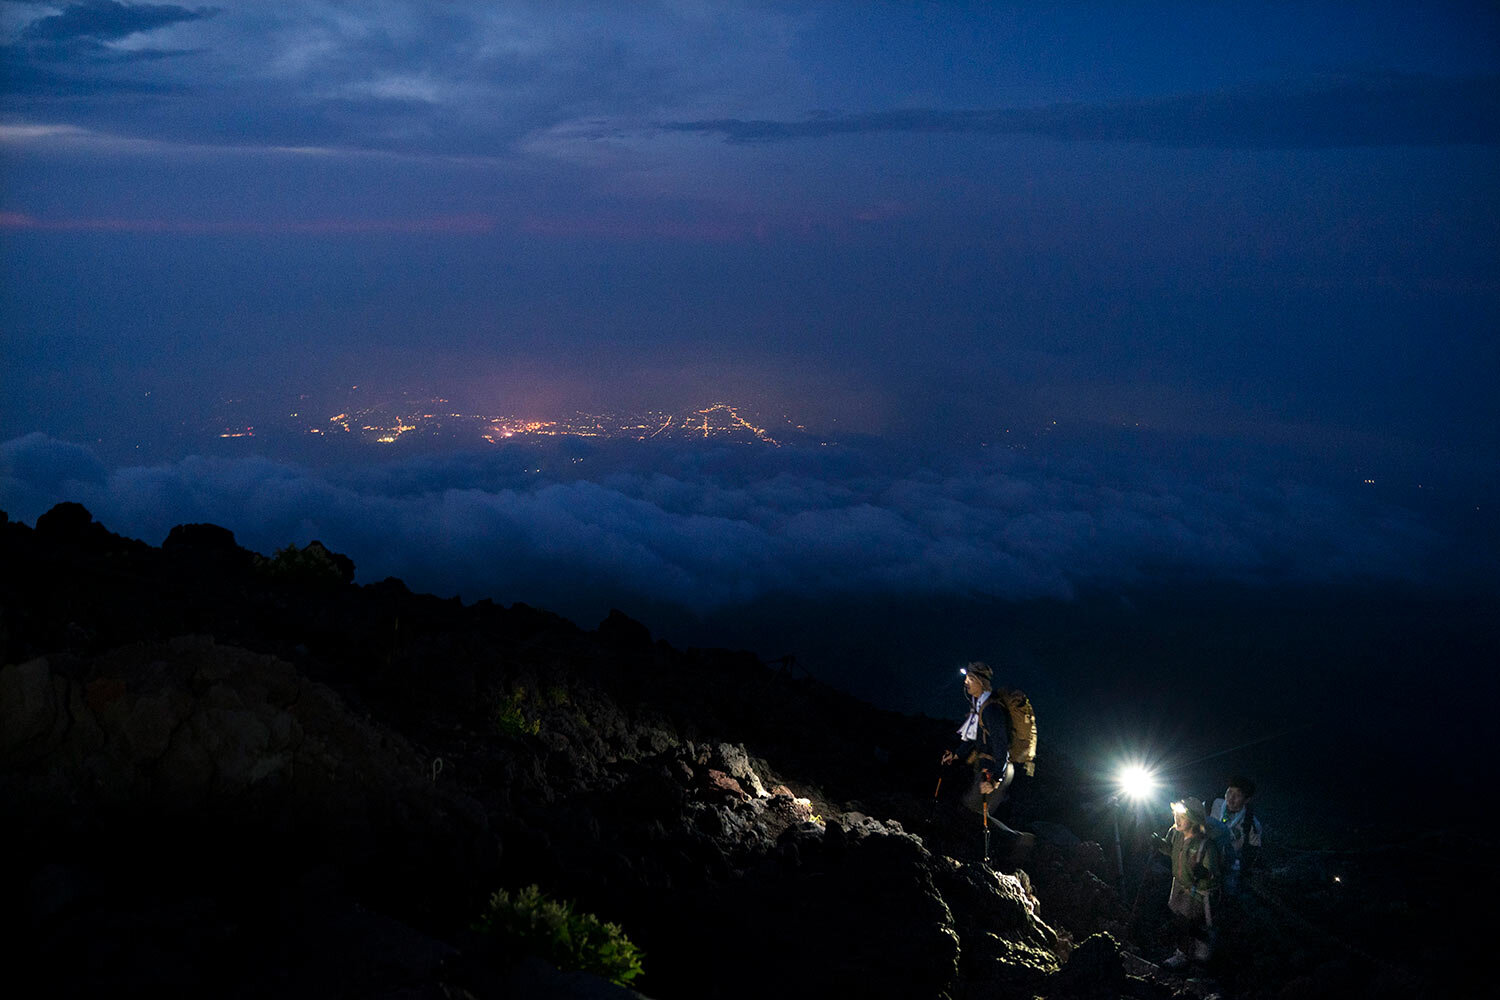  Climbers make their way along the Yoshida trail toward the summit of Mount Fuji as the glow from the town's lights are visible through clouds Friday, Aug. 2, 2019, in Japan. (AP Photo/Jae C. Hong) 